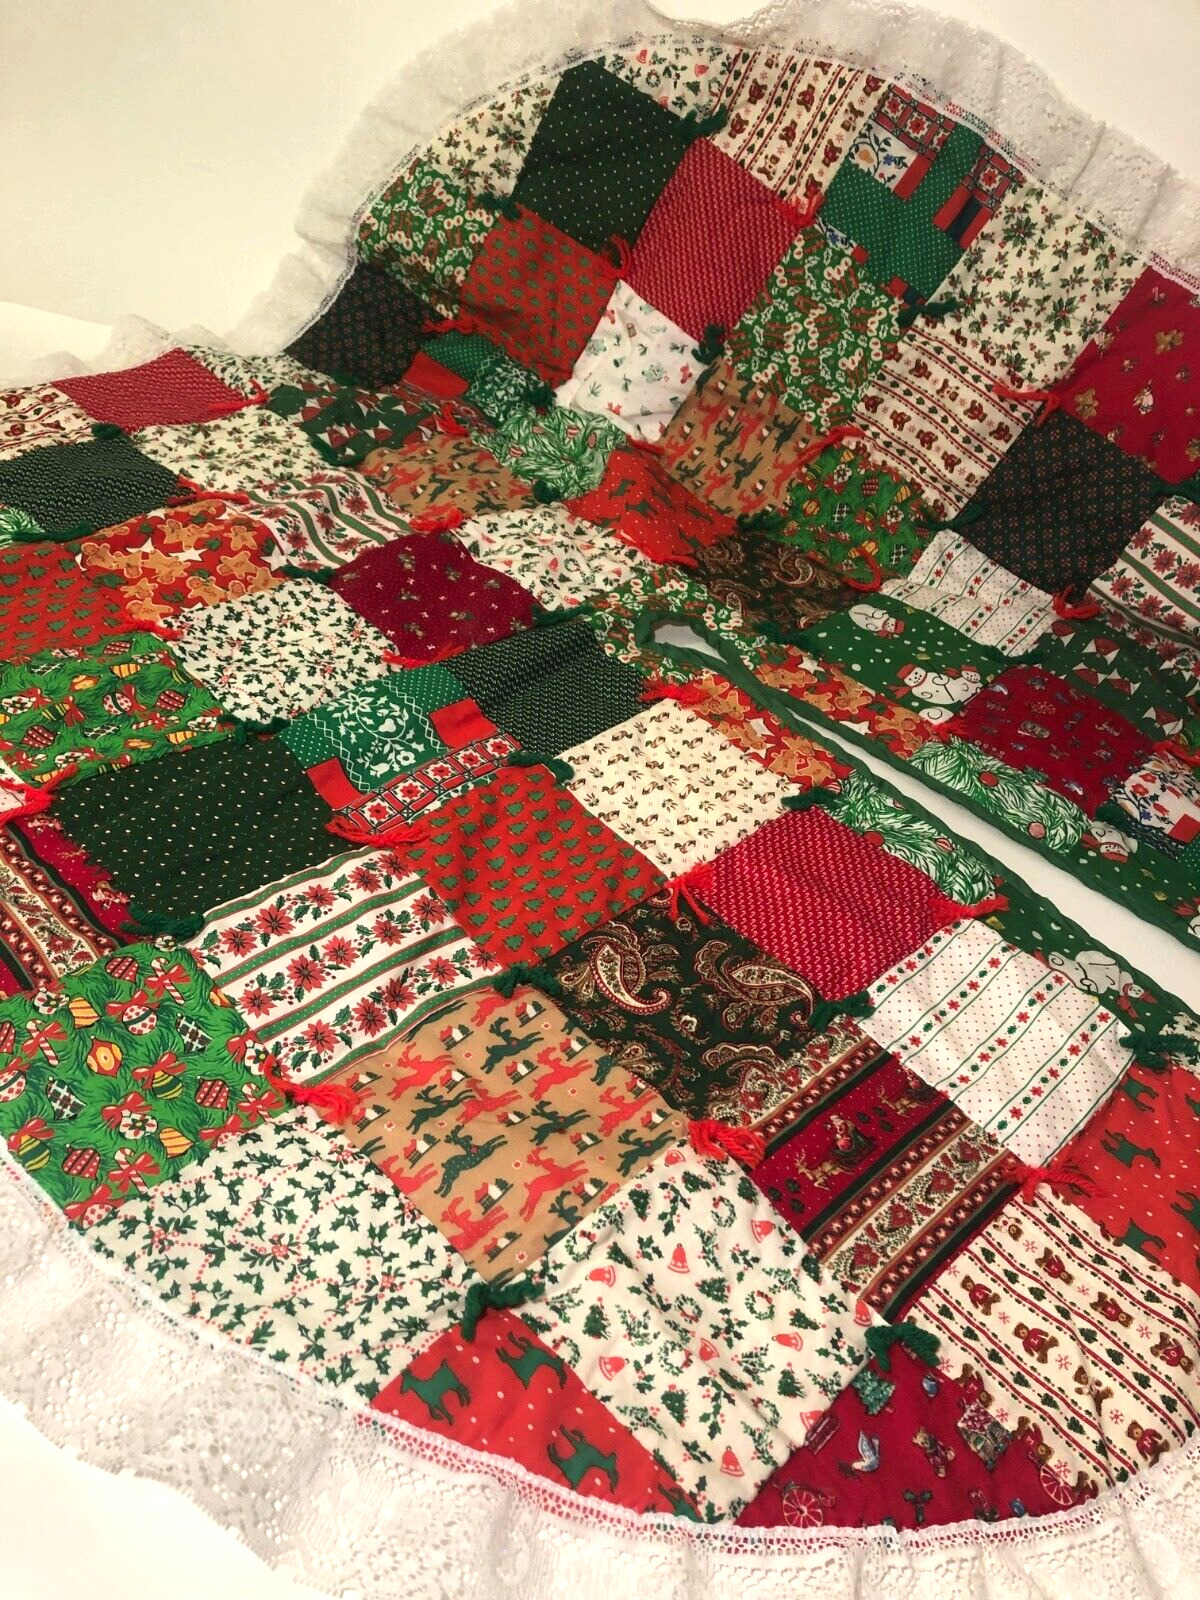 VINTAGE CHRISTMAS PATCHWORK QUILT TREE SKIRT RUFFLE LACE HANDMADE / HOMEMADE